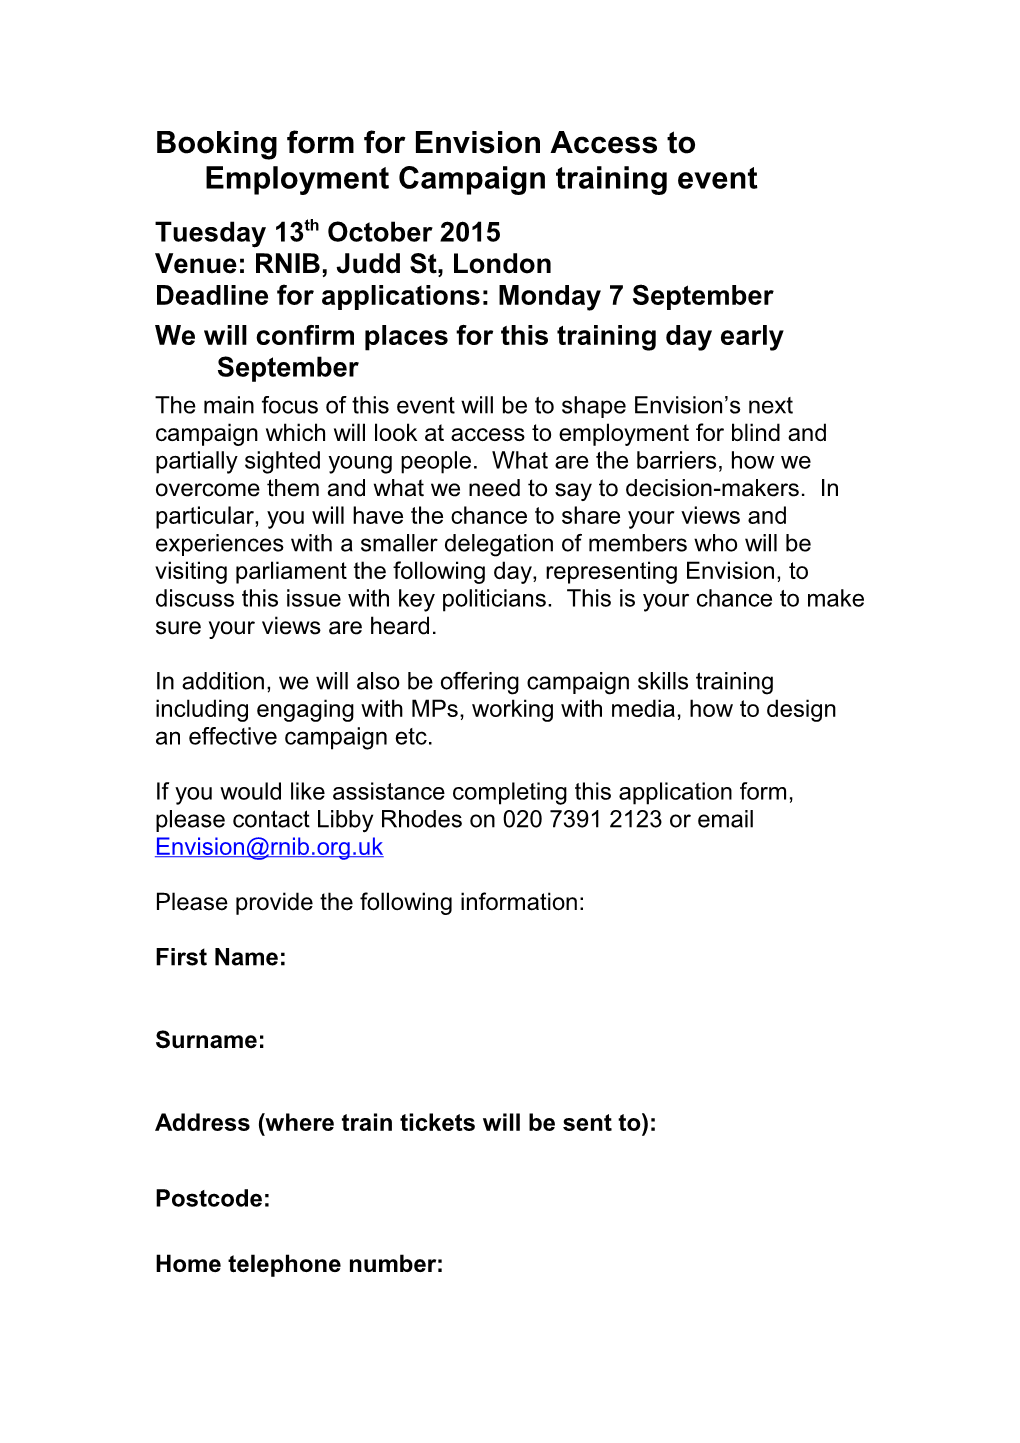 Booking Form for Envision Access to Employment Campaign Training Event